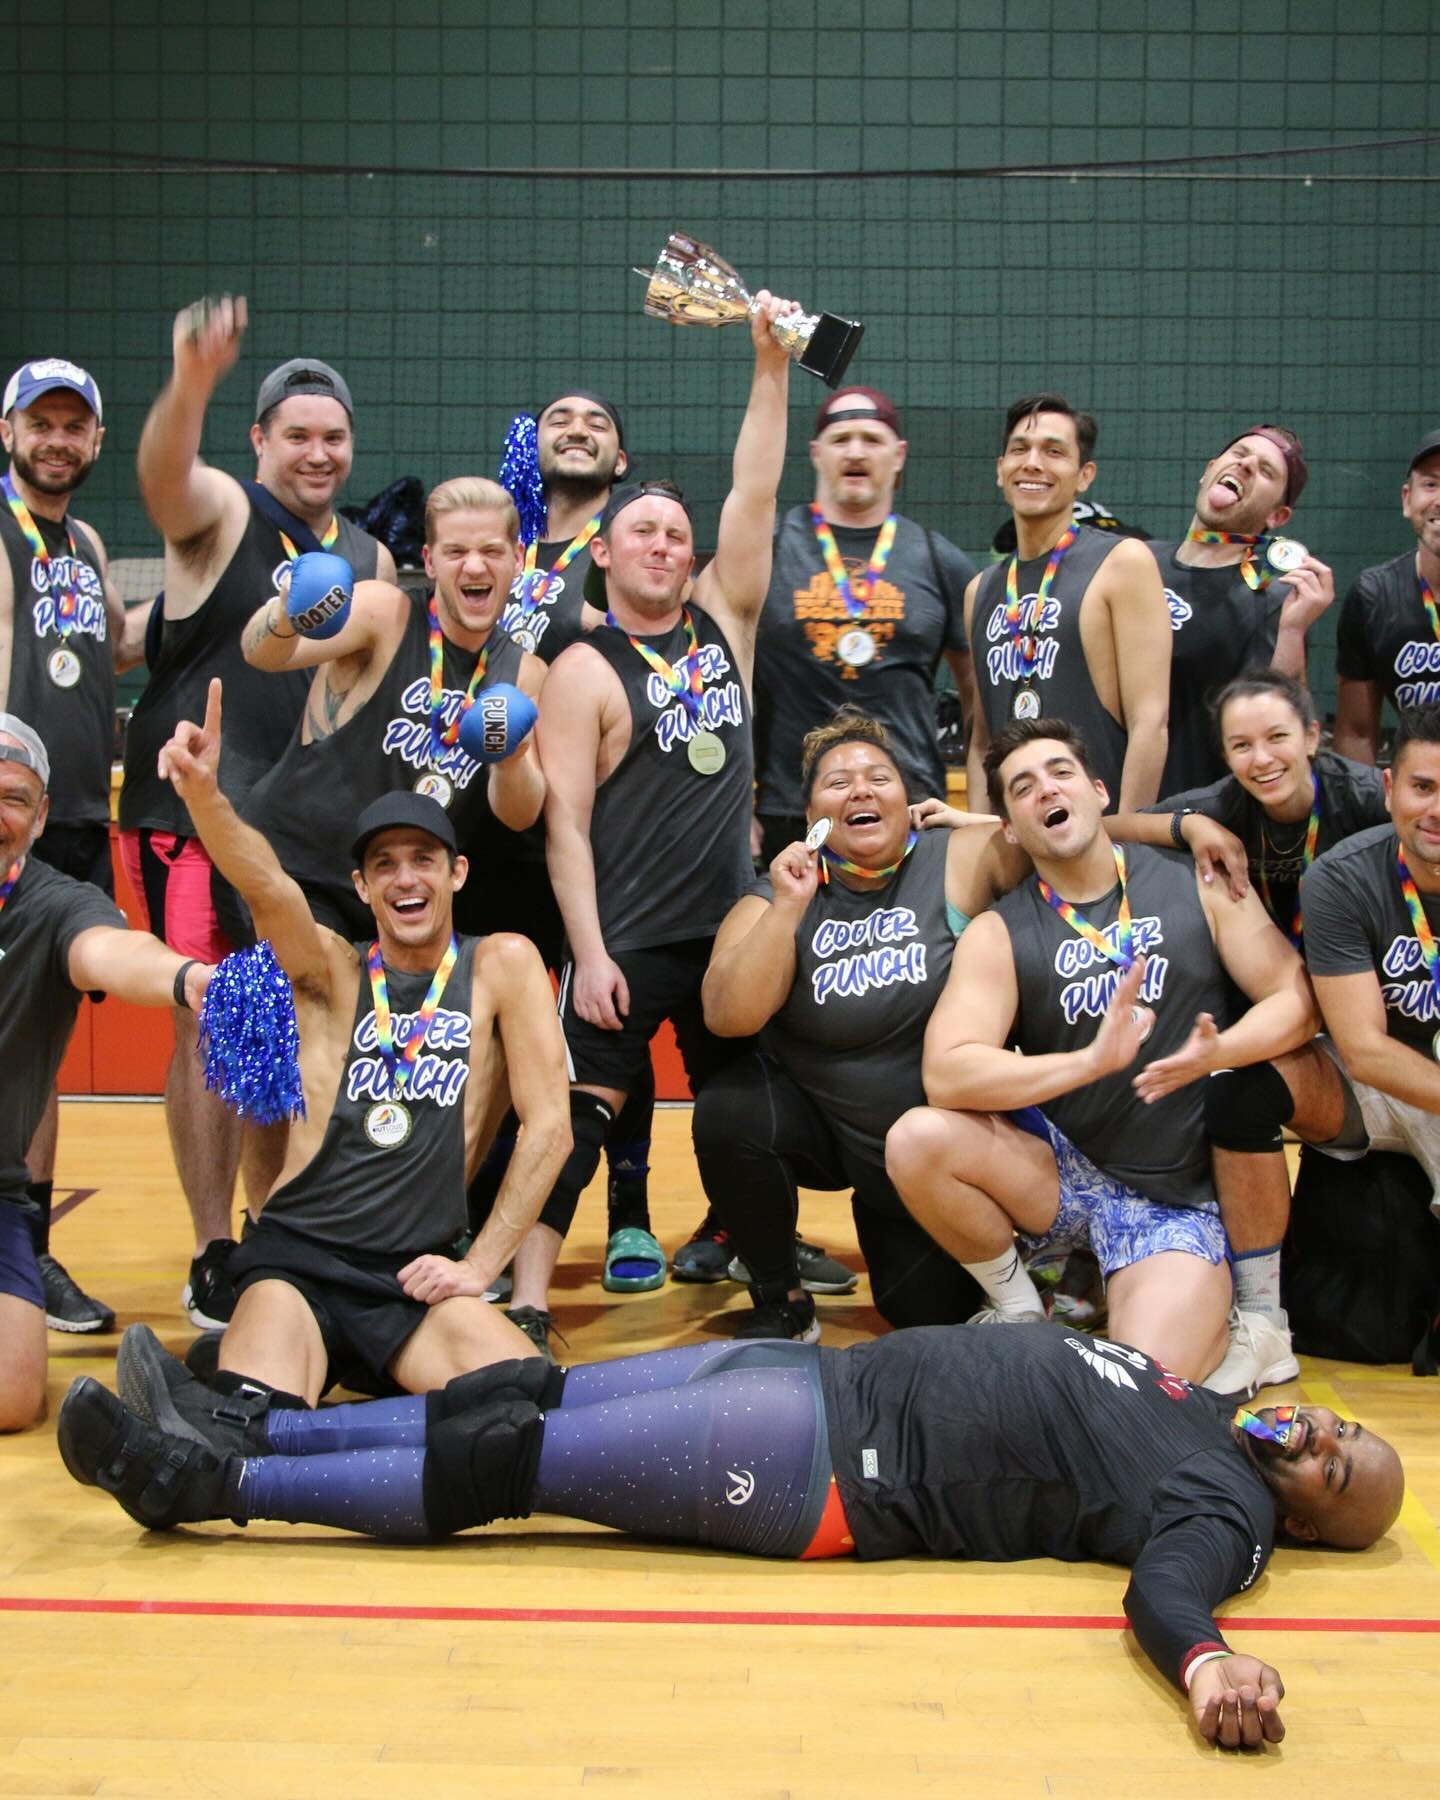 Celebrating some of our Spring Champions in Kickball and Dodgeball! Spring Registration is open! Make sure to register today as early bird is ending!! https://outloudlosangeles.leagueapps.com/leagues